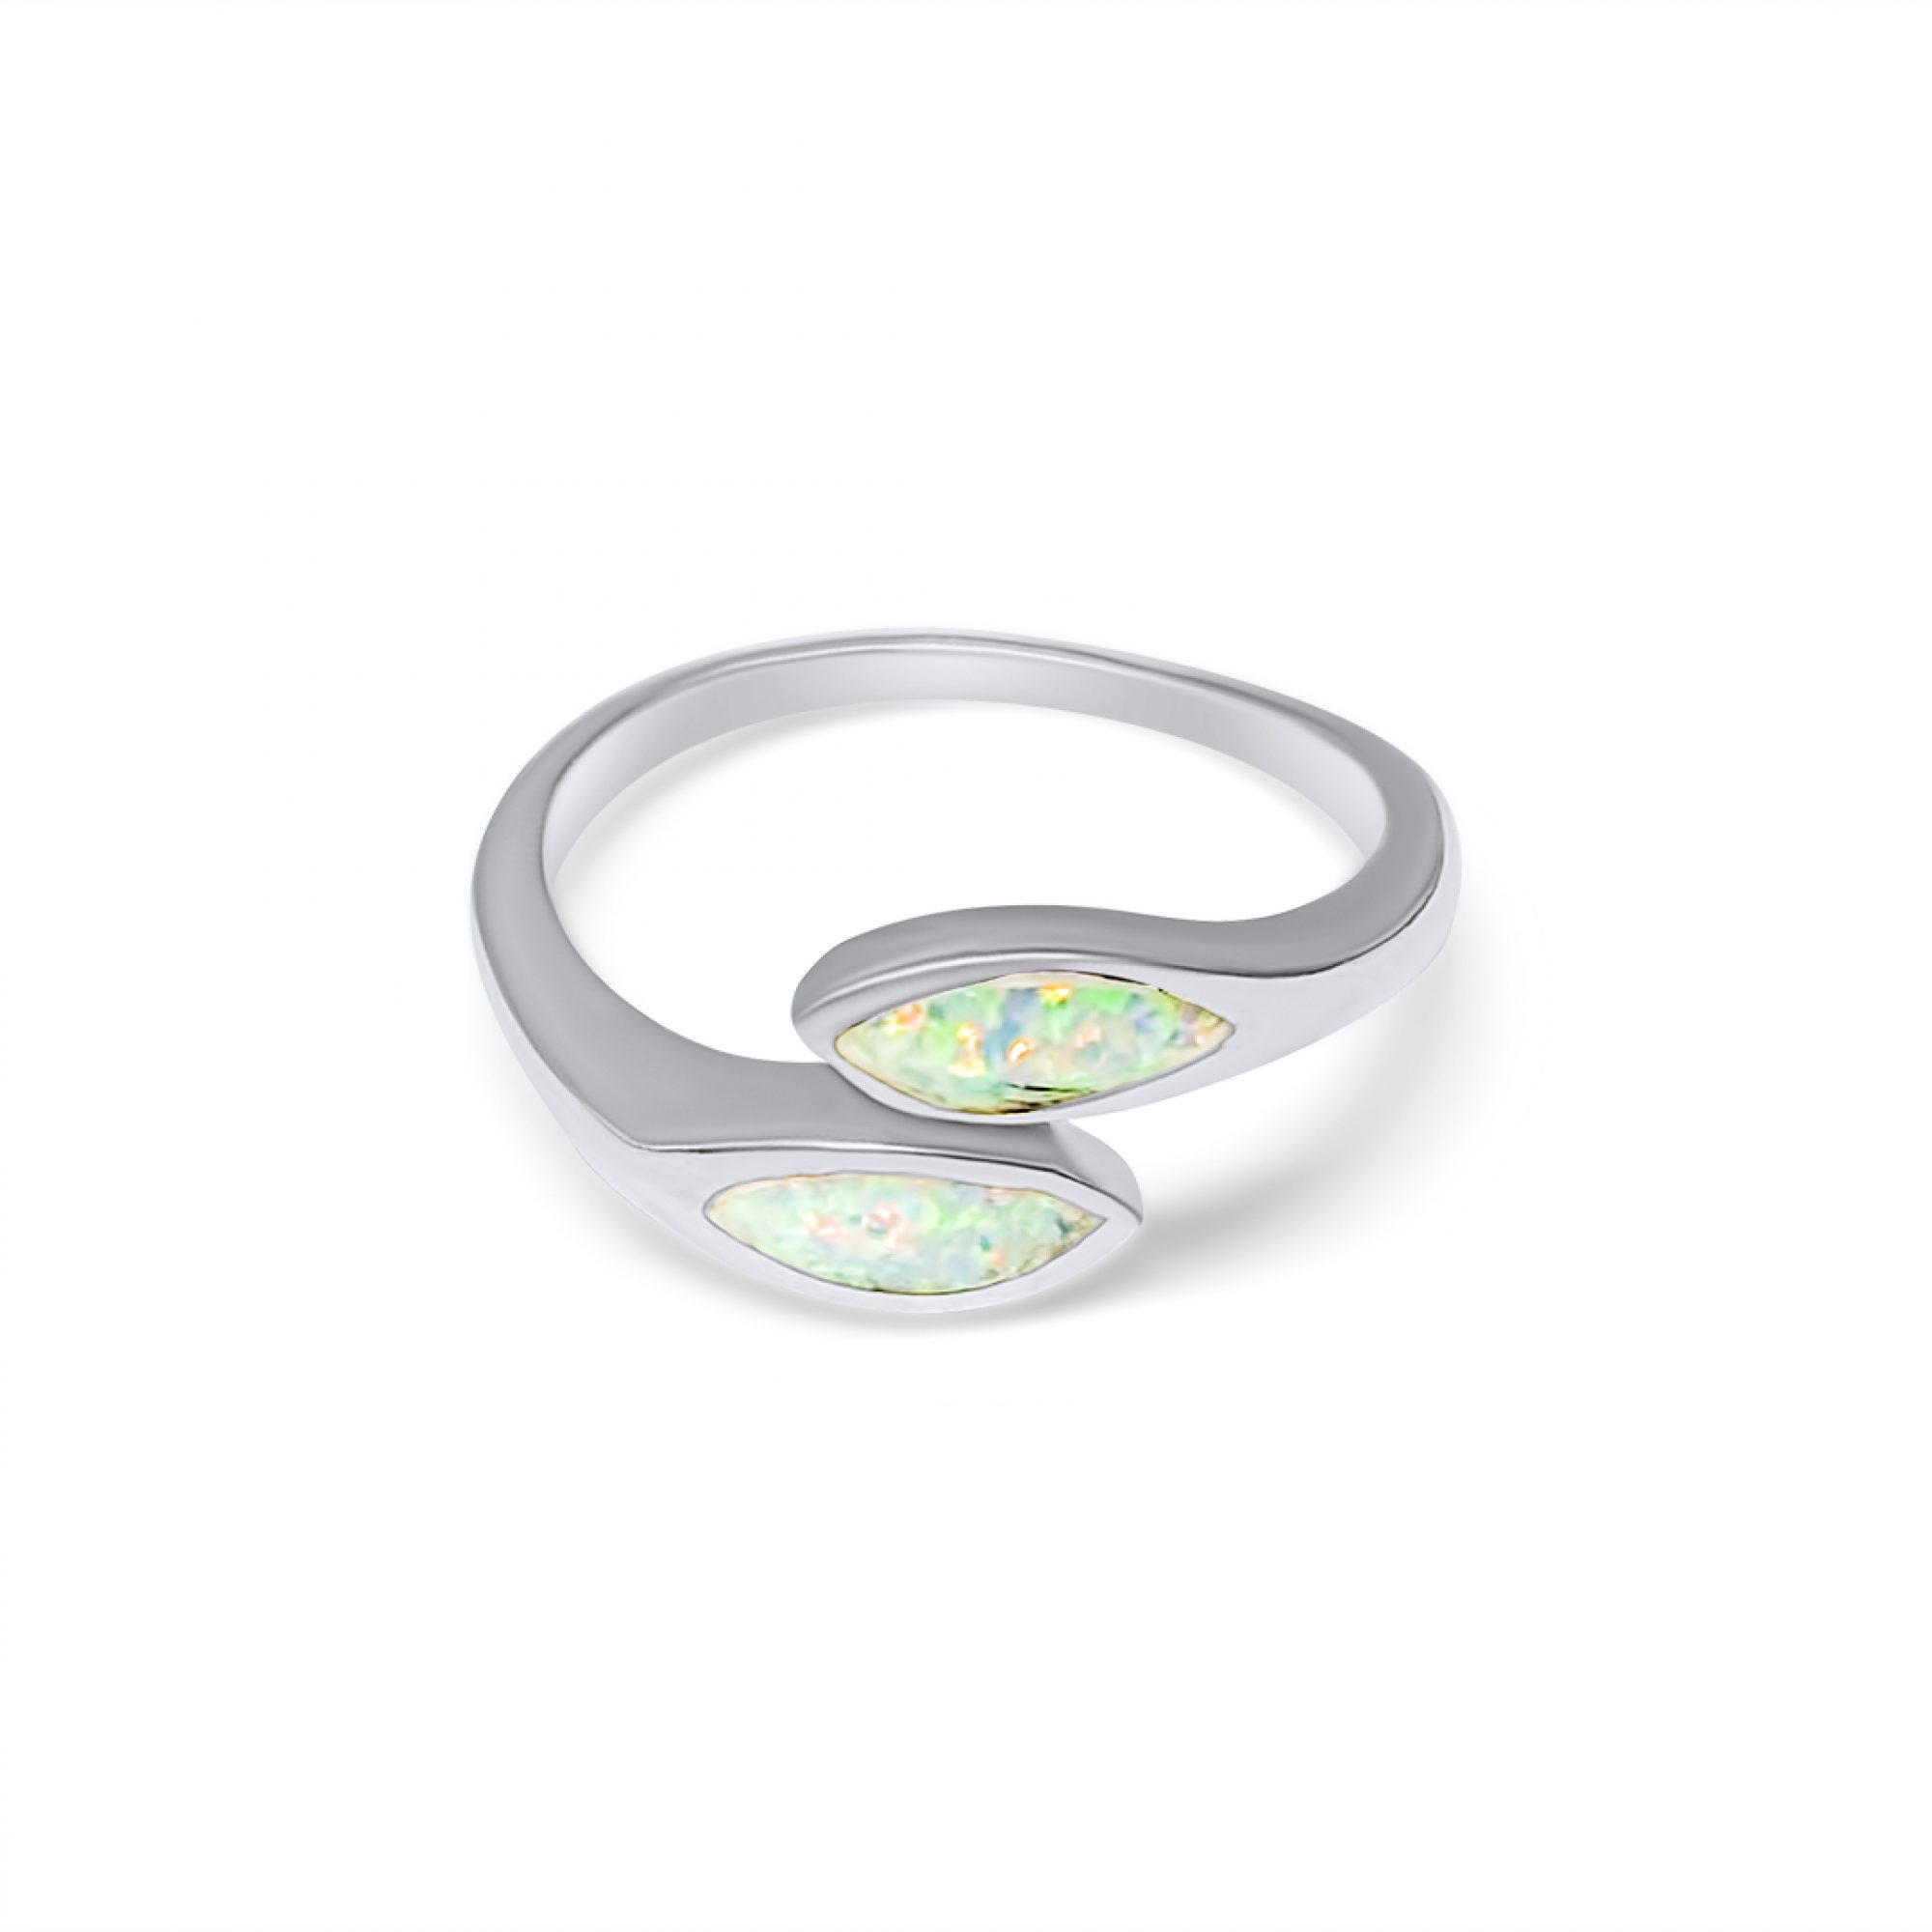 Silver ring with white opal